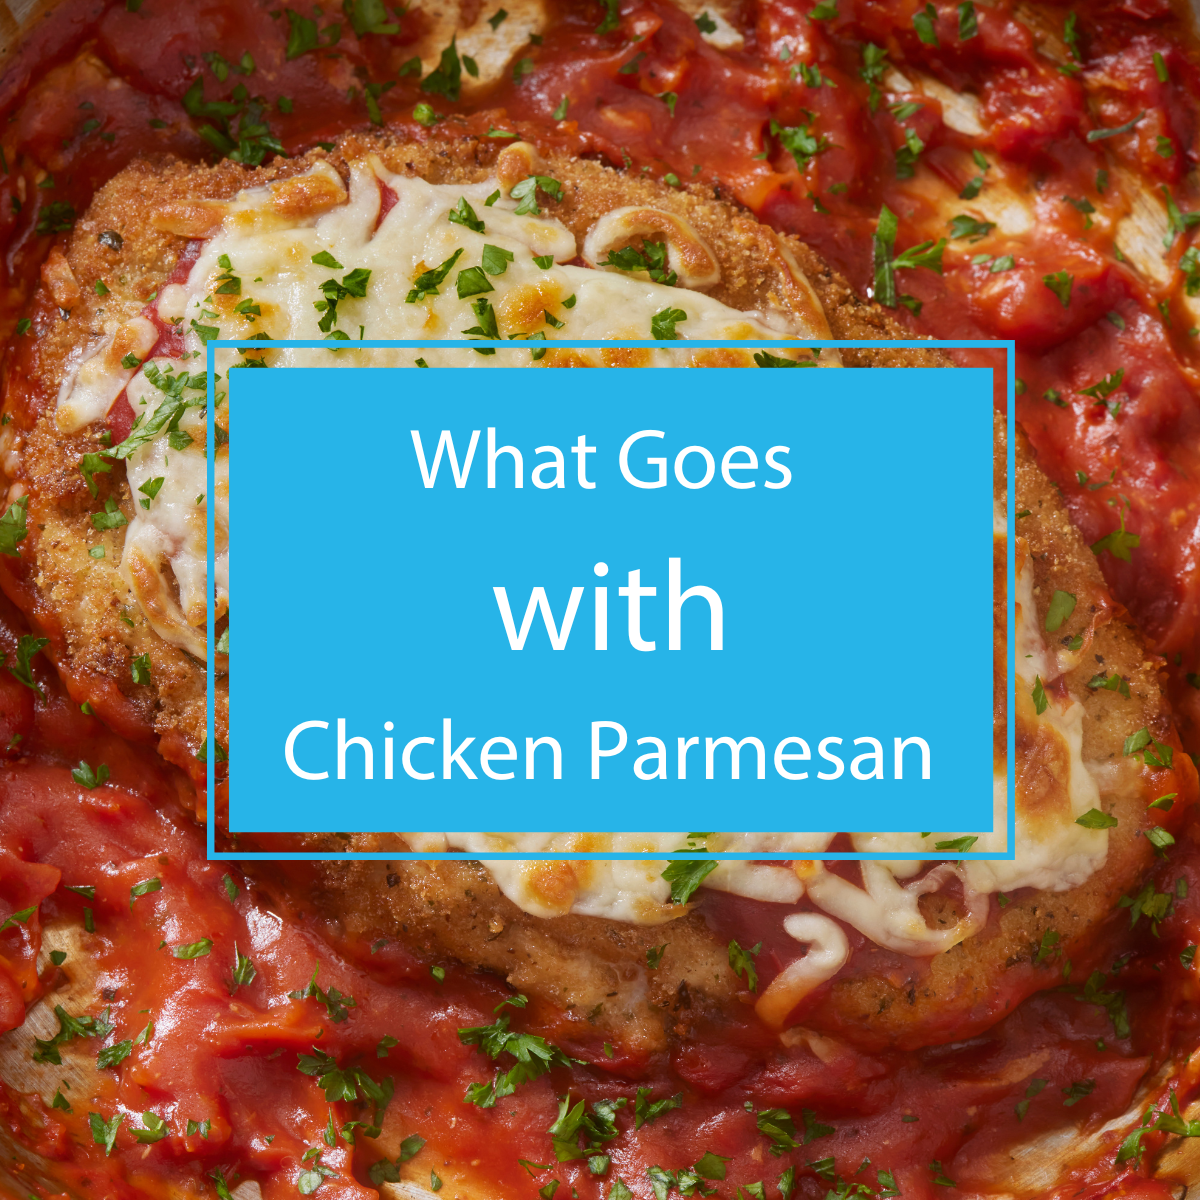 What goes with chicken parmesan